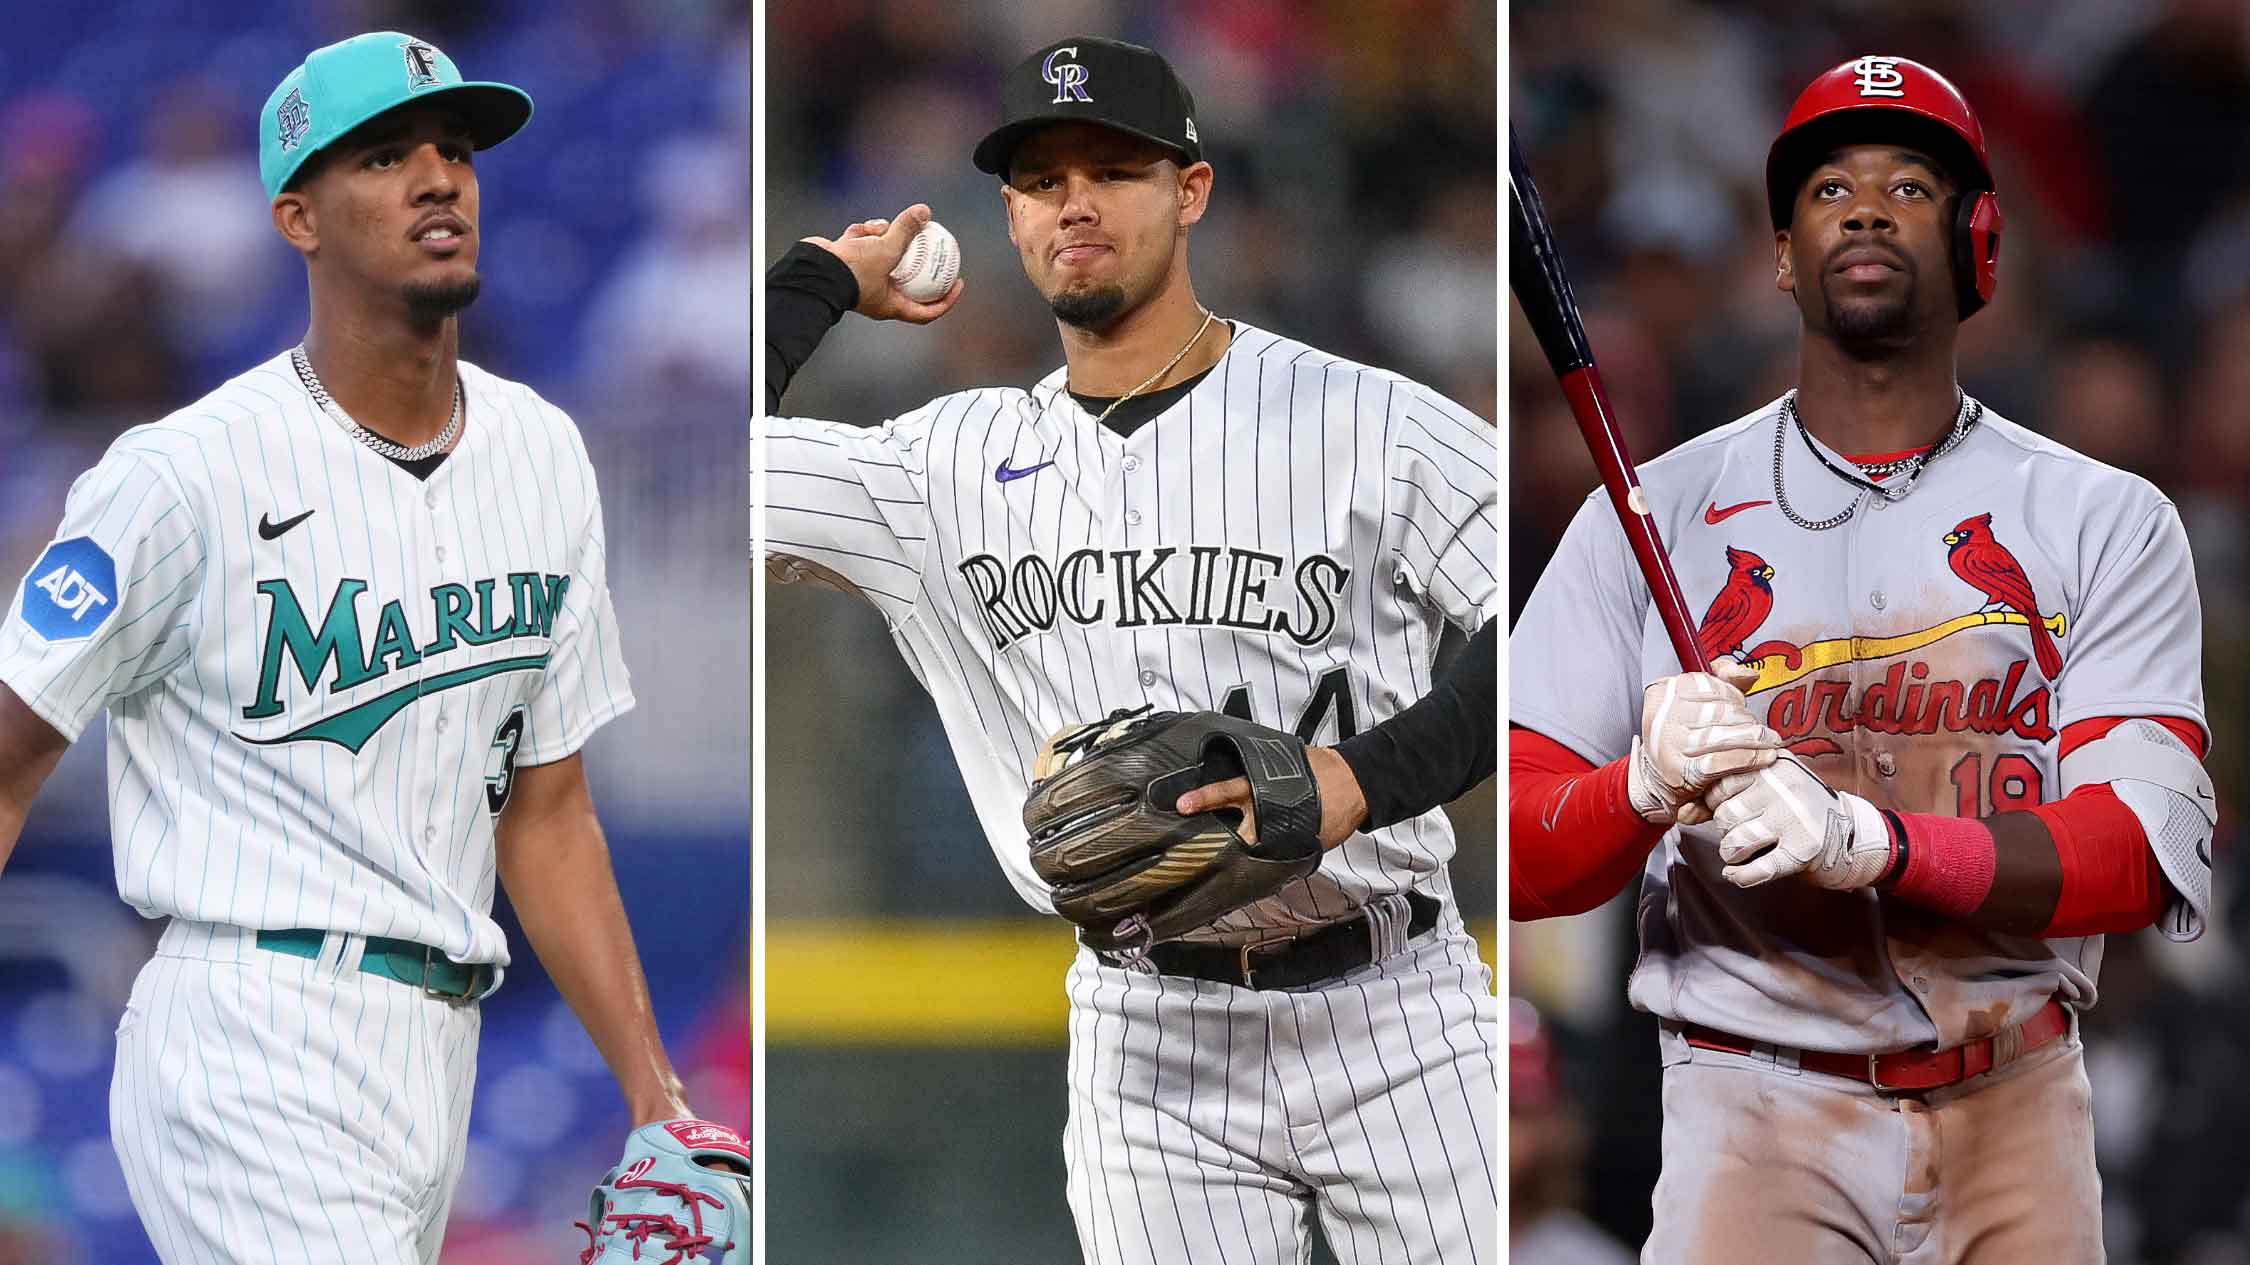 MLB on FOX - Which American League team has the best throwback